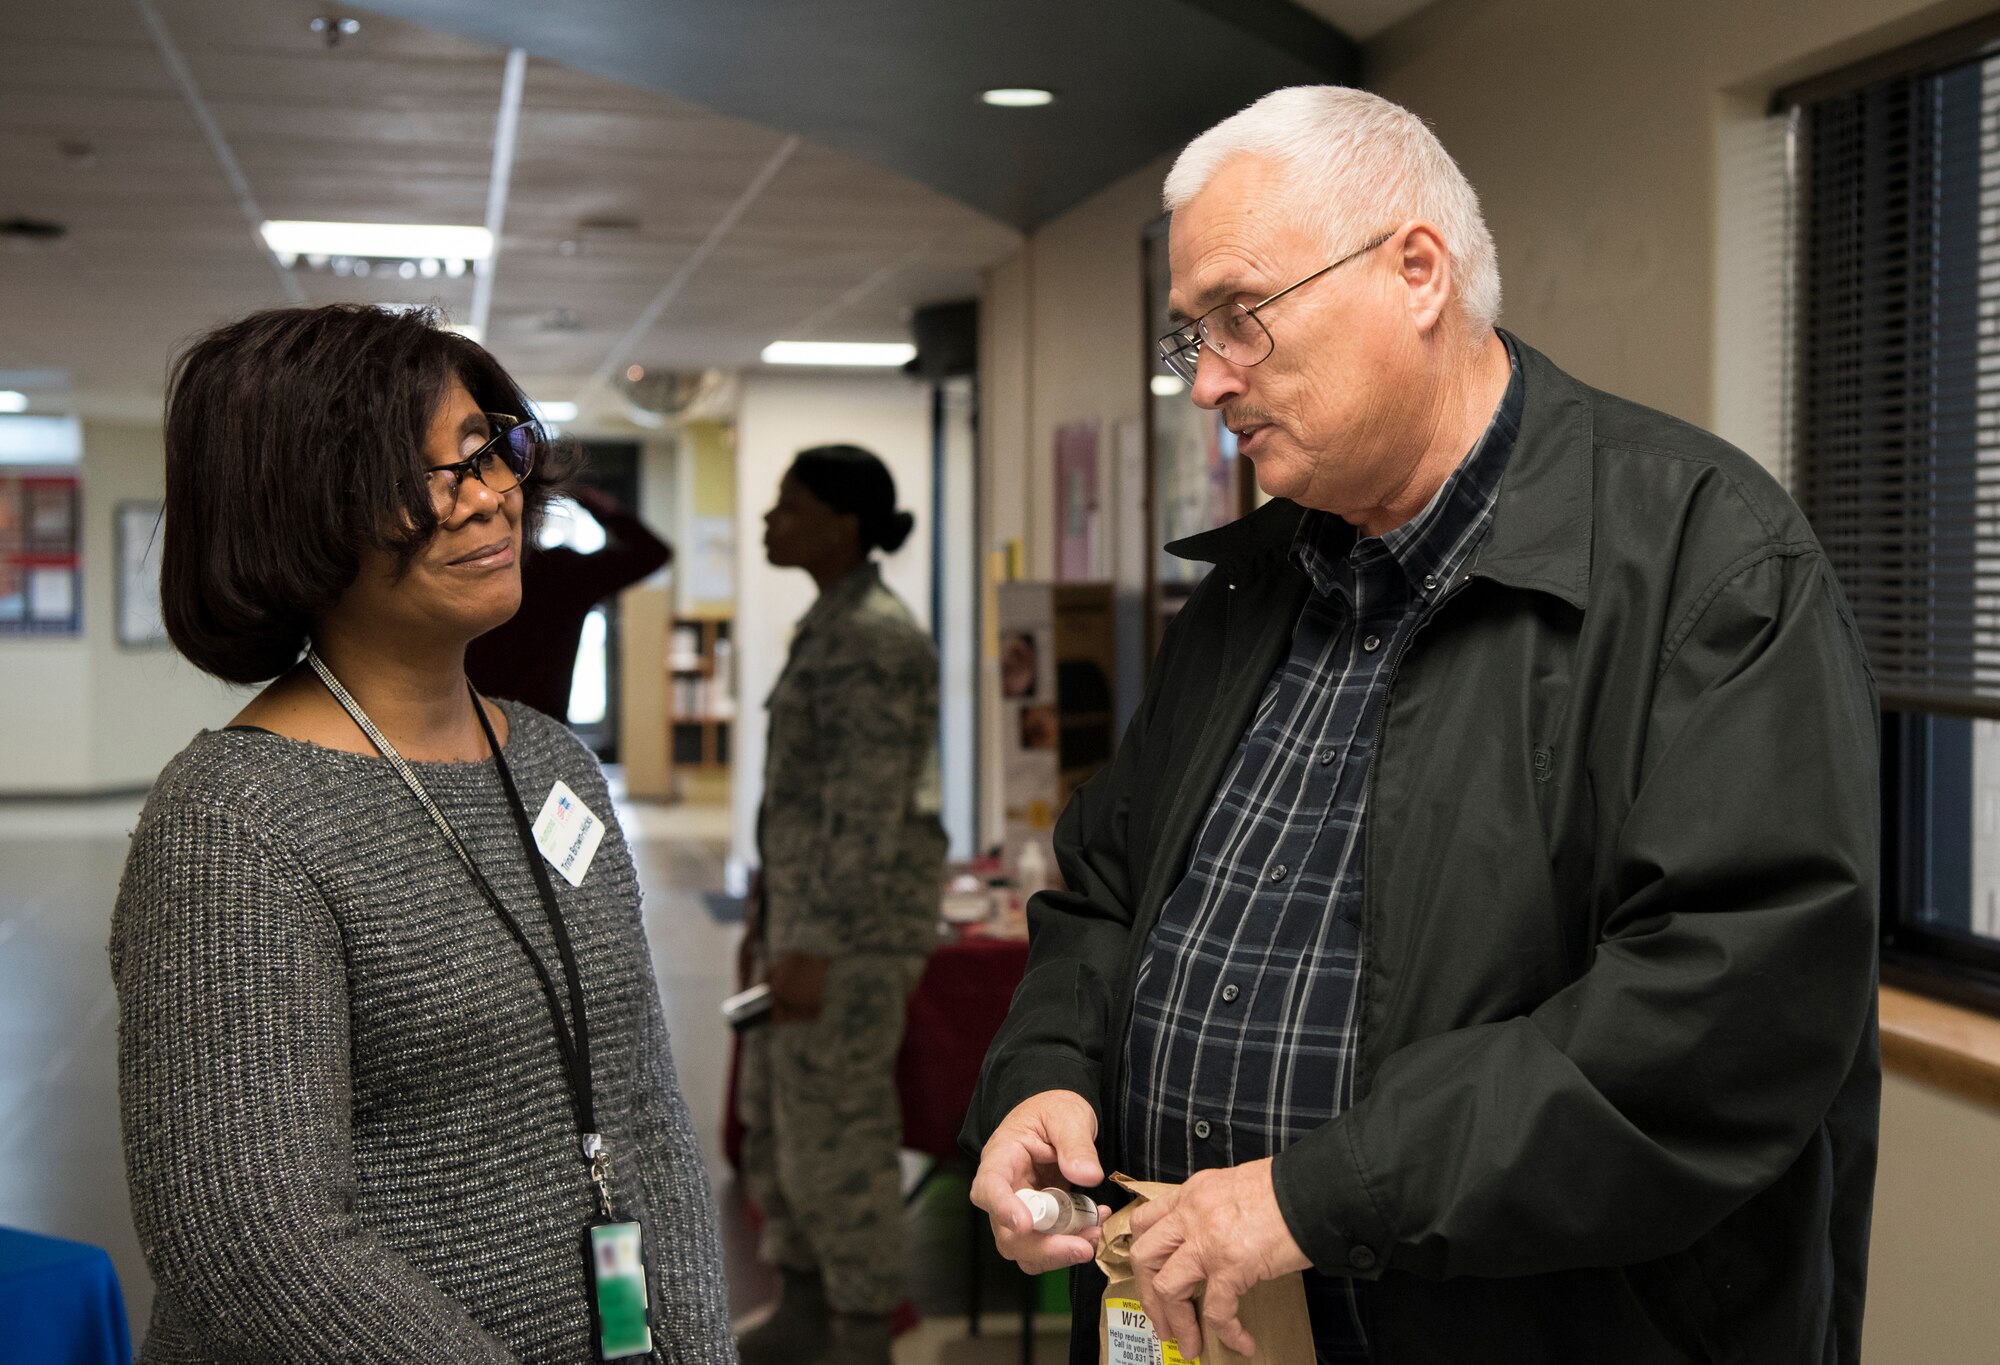 Trina Brown-Hicks, Humana health systems manager, speaks with Phillip R. Wright, attendee, during the 436th Medical Group Health Fair on Nov. 27, 2018, at Dover Air Force Base, Del. Attendees were offered free medical information on topics such as diabetes, disease management, dental health and cervical cancer. (U.S. Air Force photo by Airman 1st Class Zoe M. Wockenfuss) (This image has been obscured to protect personal identification information)